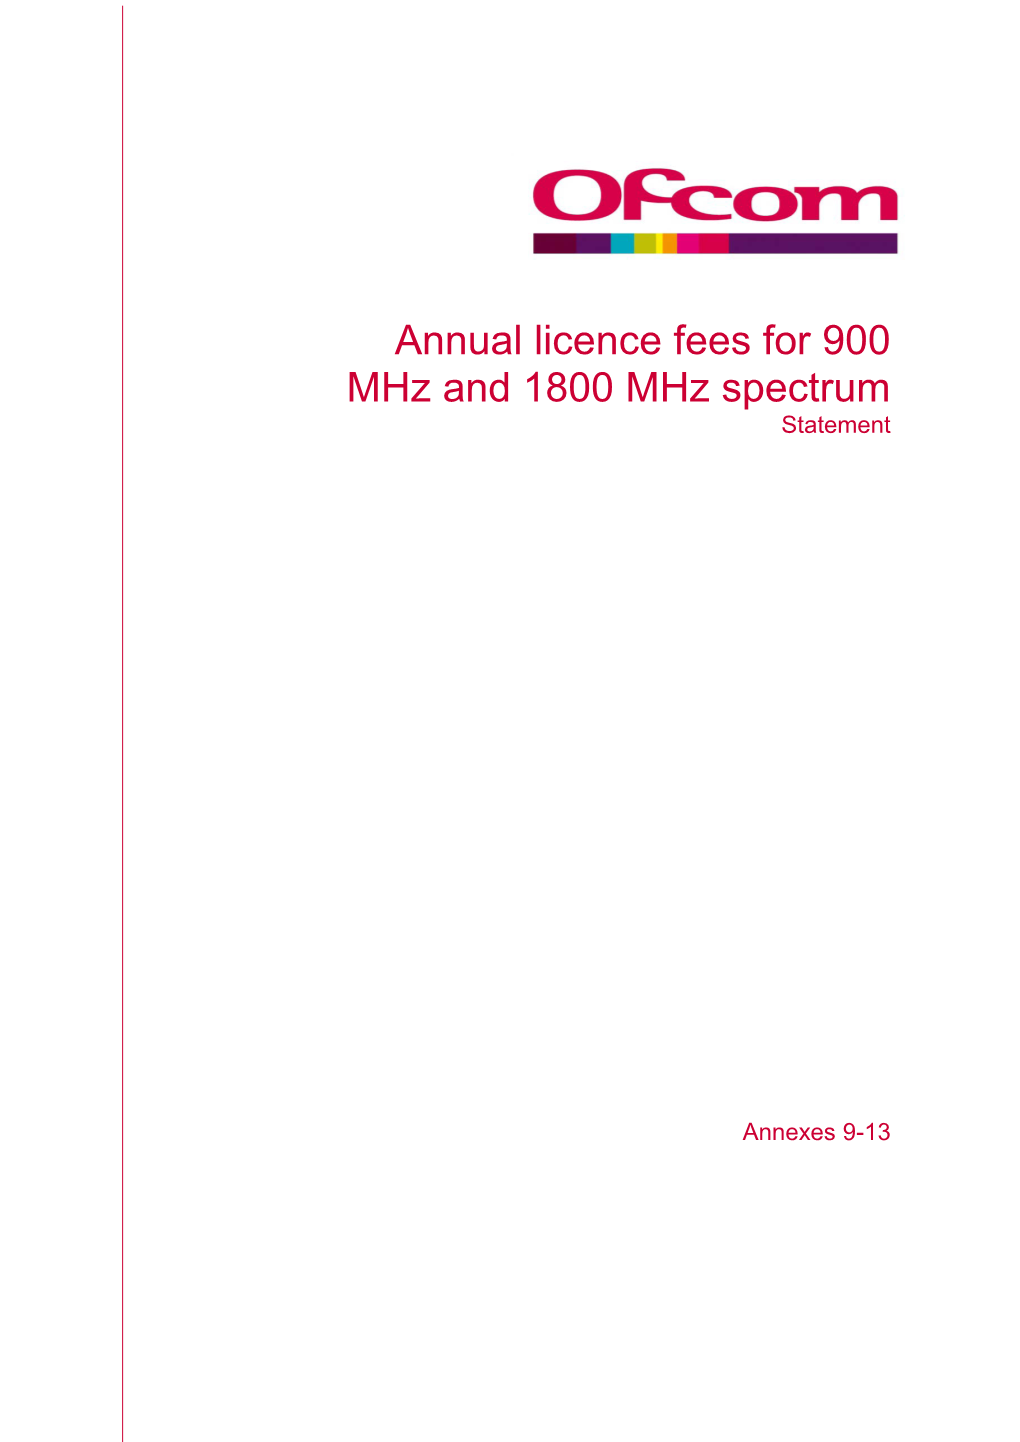 Annual Licence Fees for 900 Mhz and 1800 Mhz Spectrum Statement